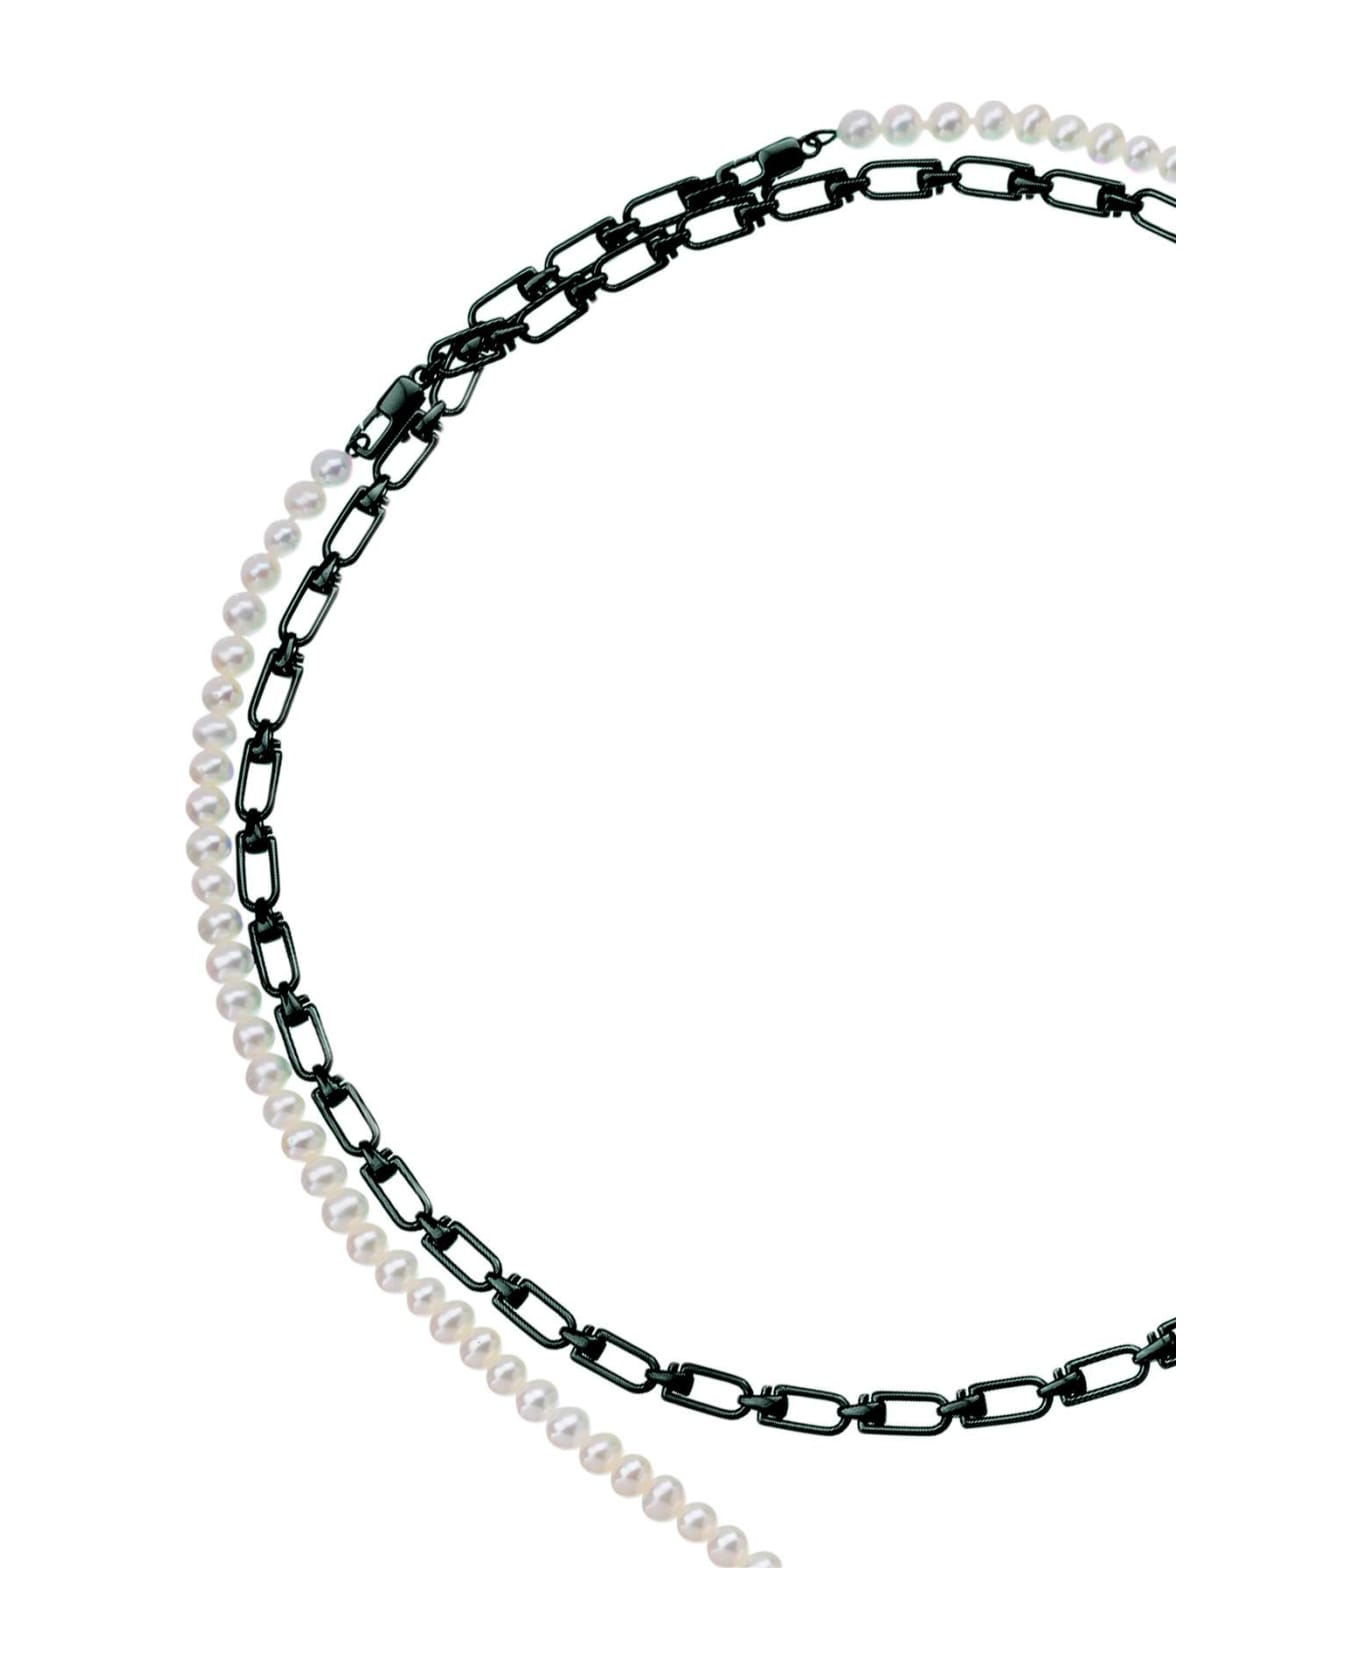 EÉRA 'reine' Double Necklace With Pearls - SILVER BLACK (White) ネックレス